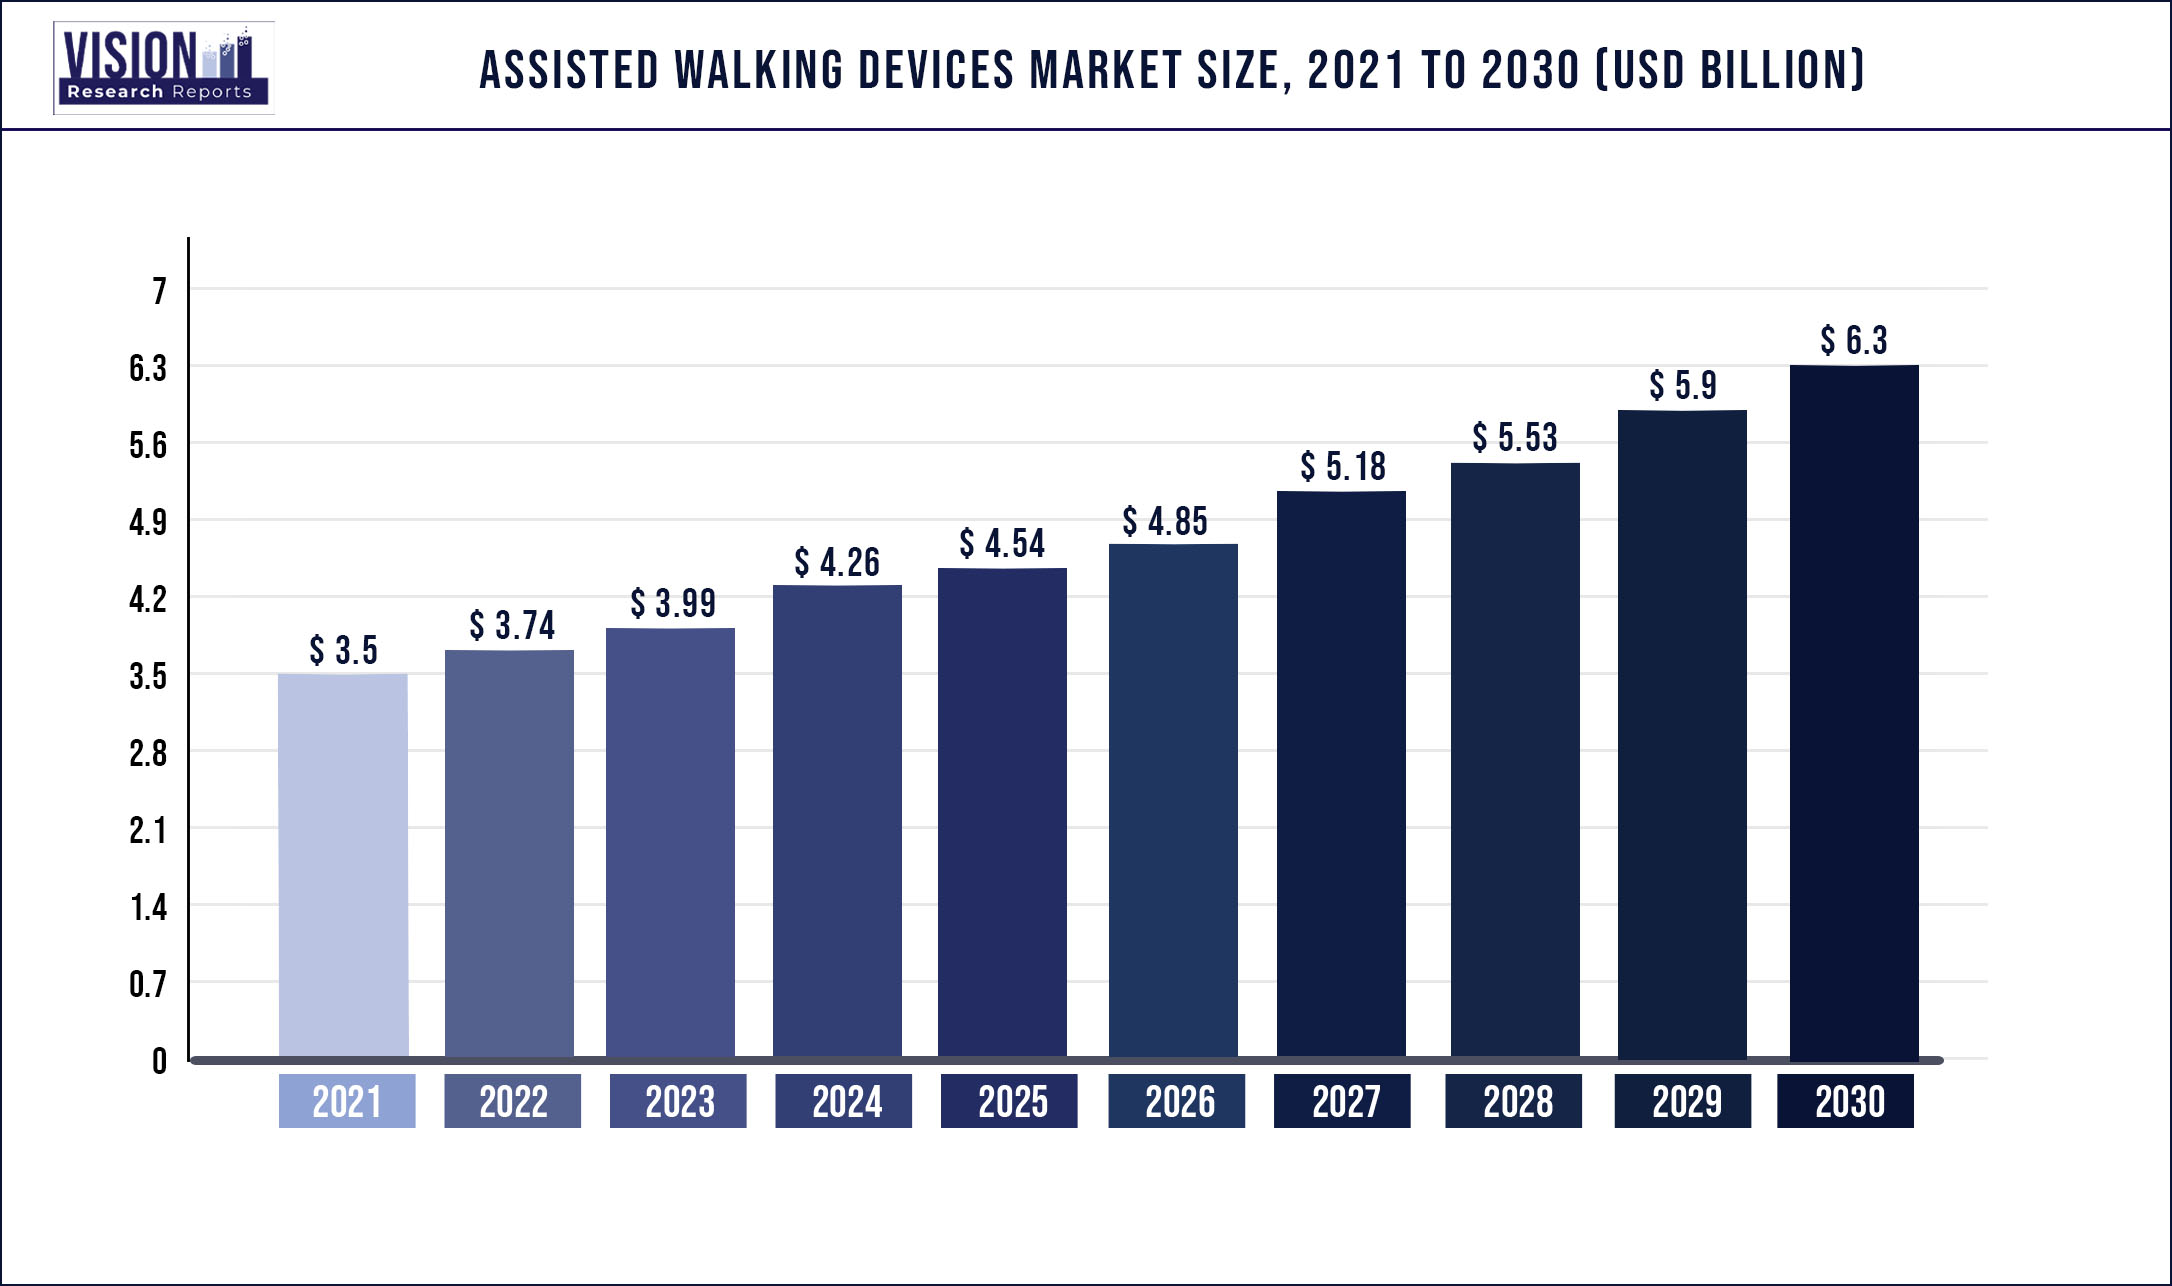 Assisted Walking Devices Market Size 2021 to 2030